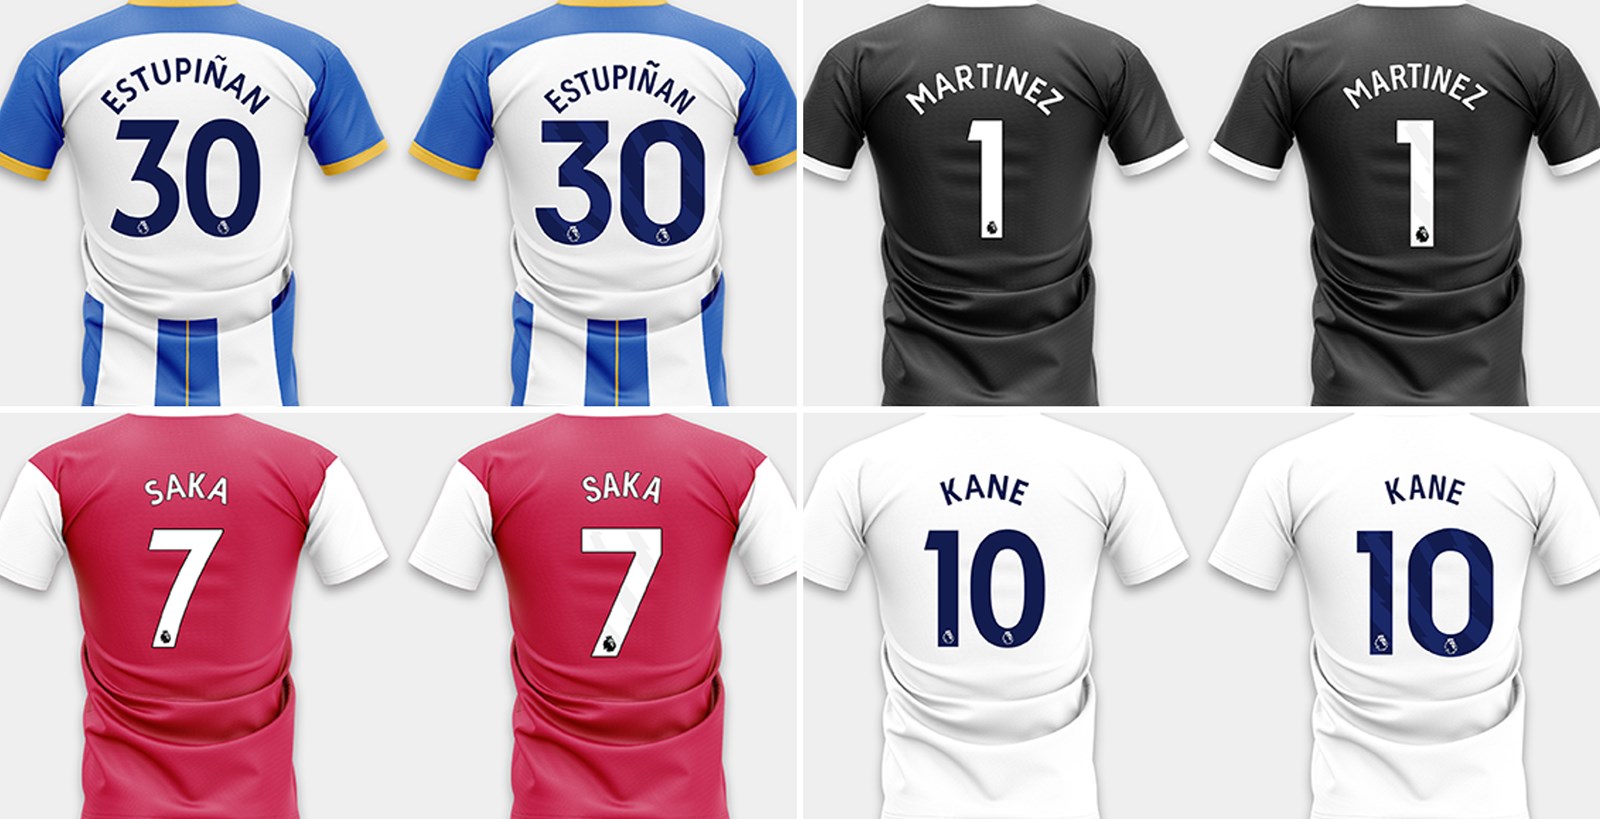 Premier League announces kit rebrand with new font for player names and  larger numbers - The Athletic